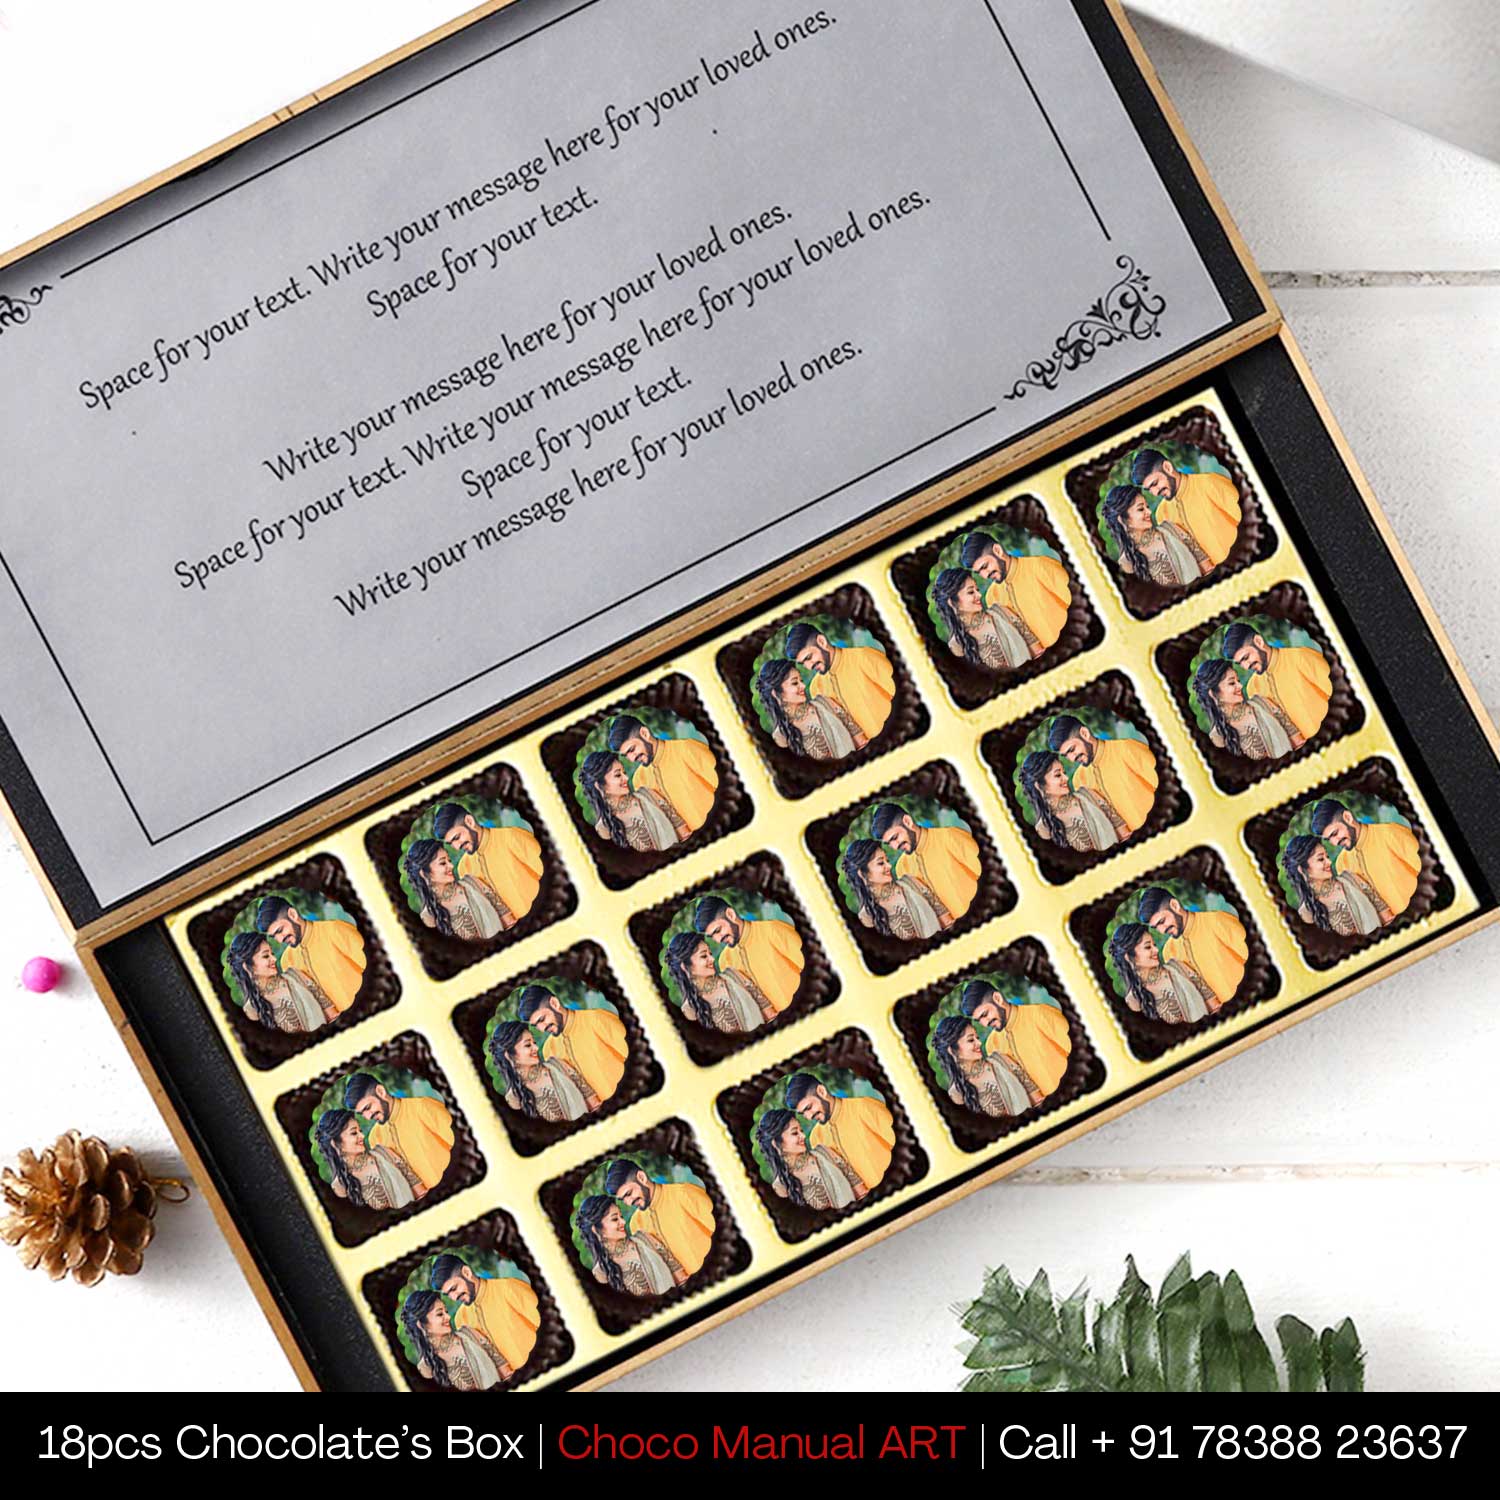 Photo printed box with appealing design and names printed chocolates